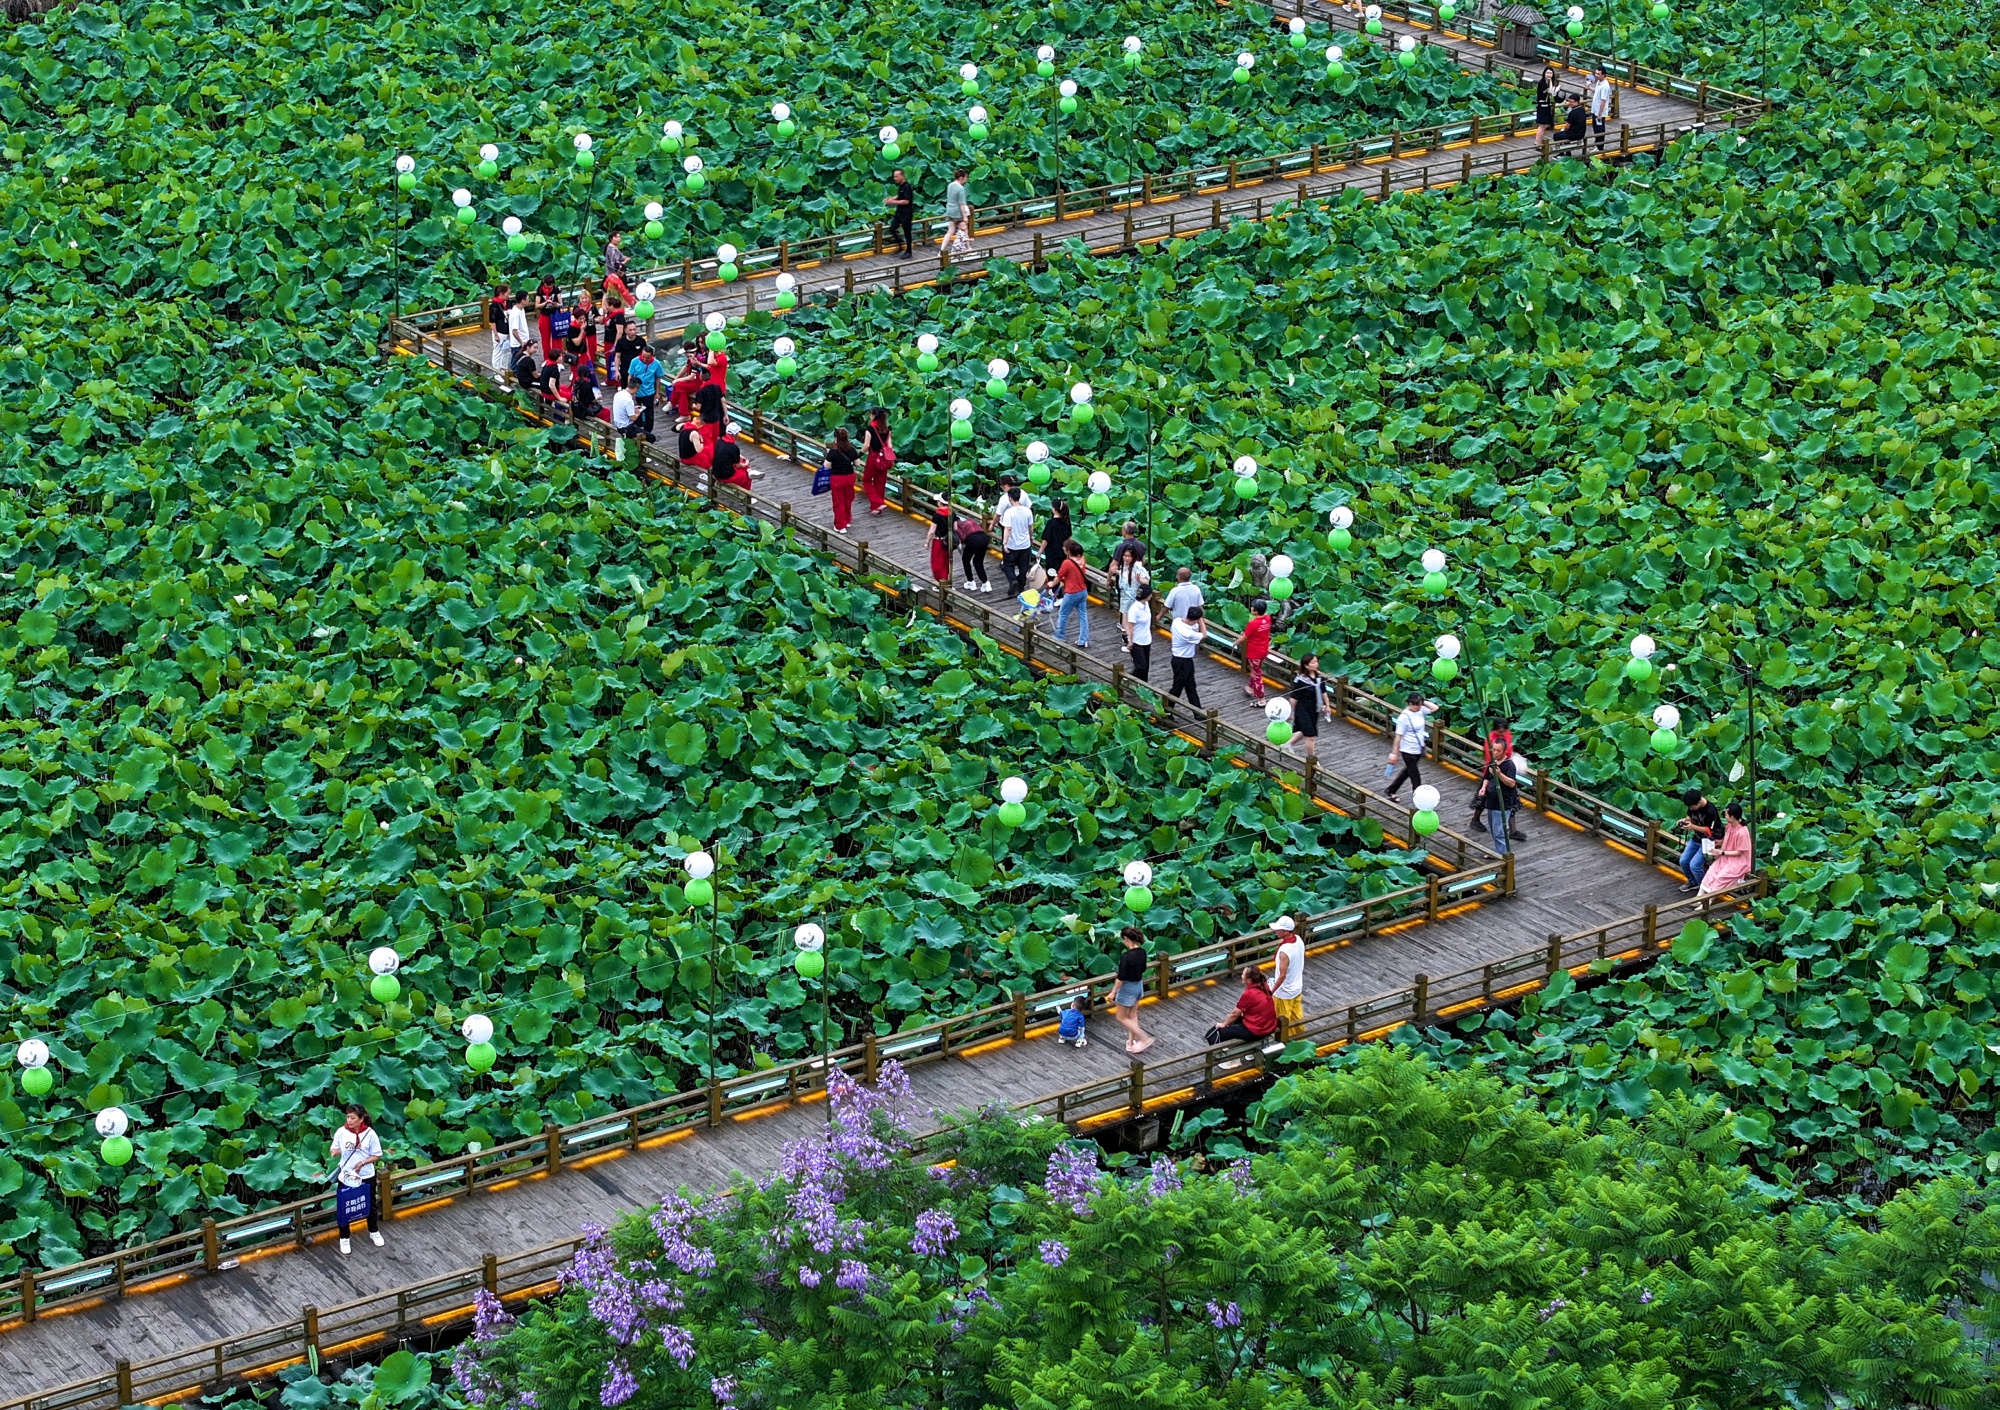 Tourists visit the ecological lotus pond in Huaying city, Sichuan province.